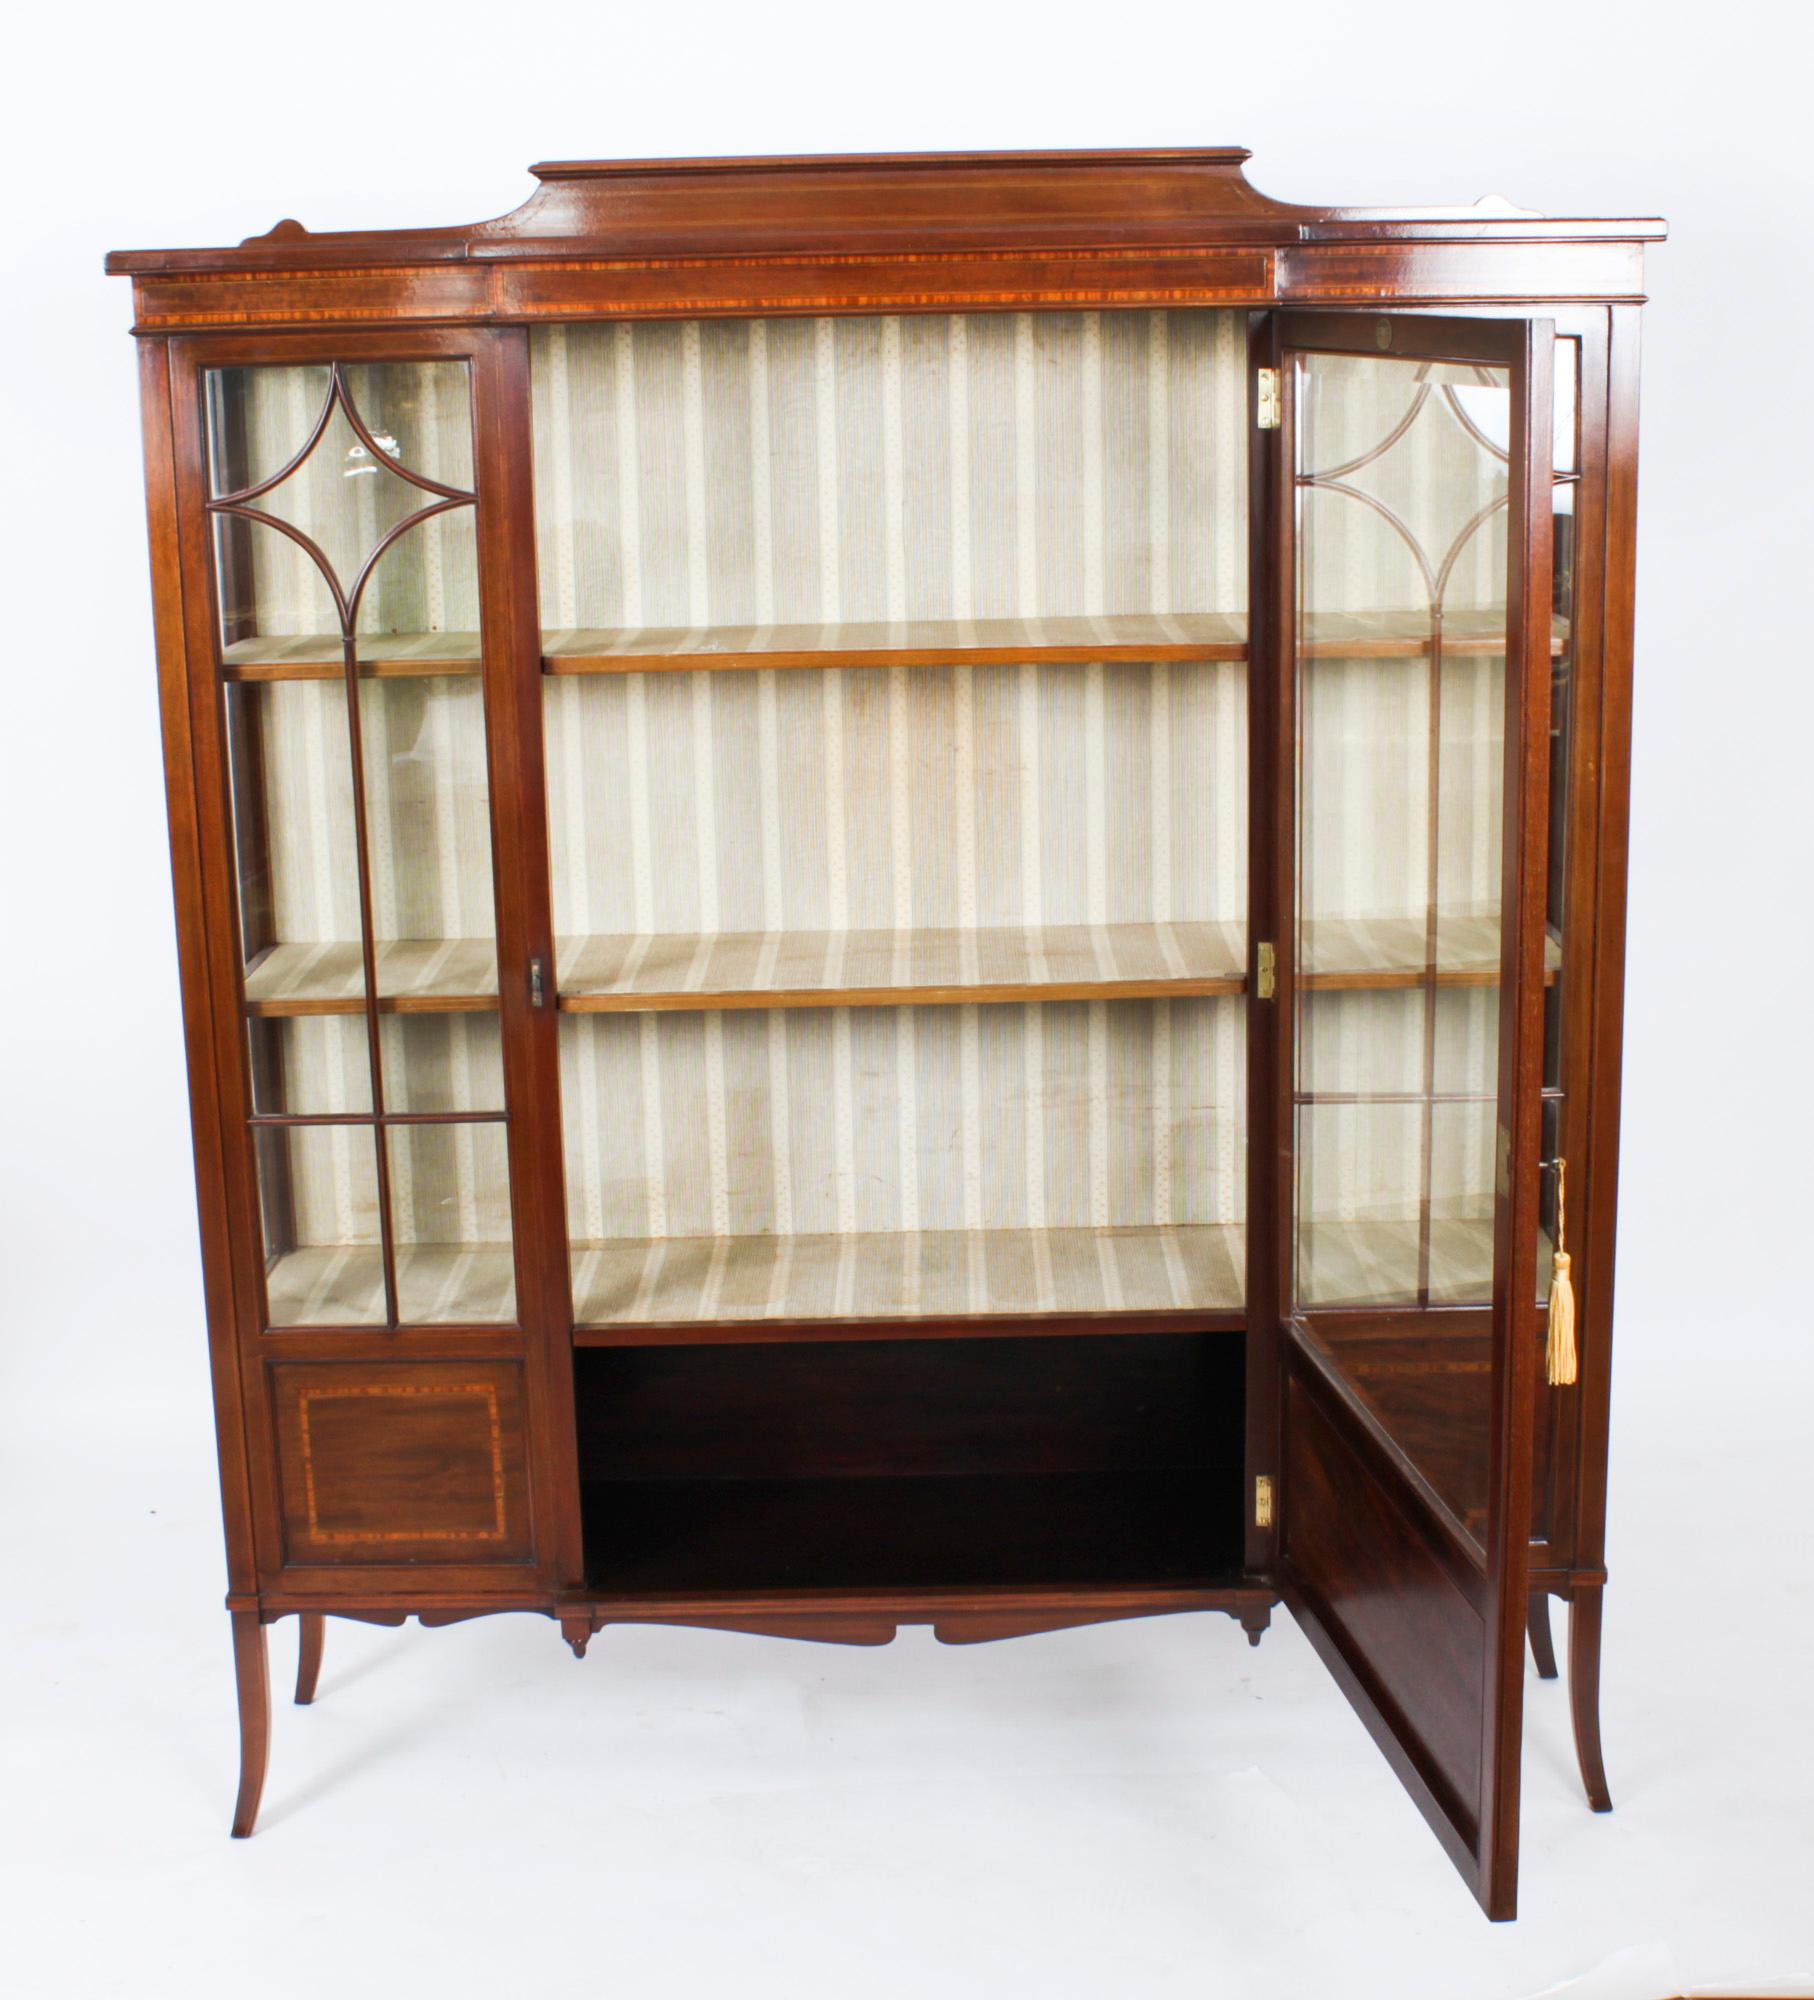 Antique Edwardian Display Cabinet by Maple & Co C1900 10